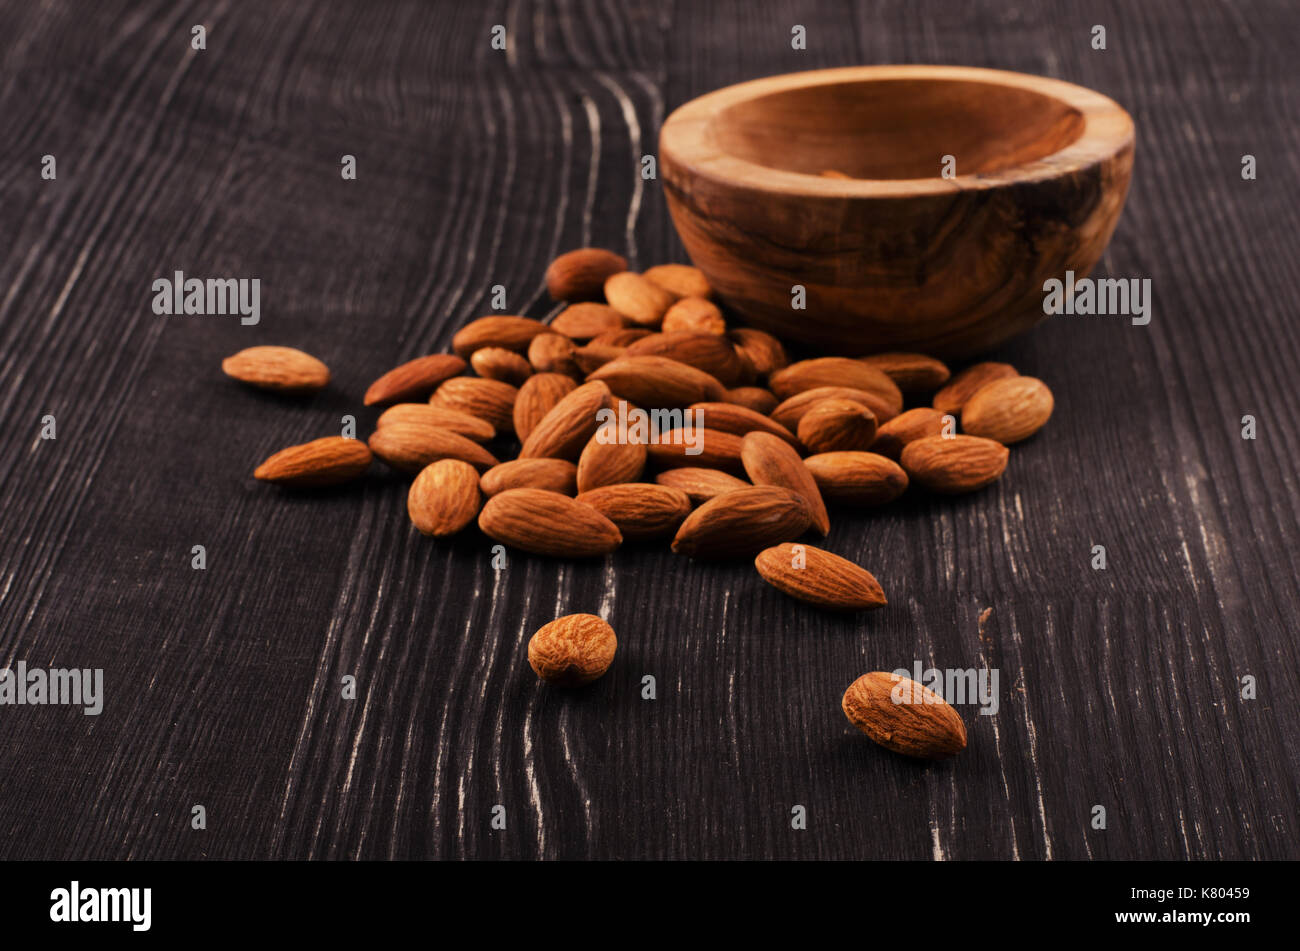 Almonds in brown bowl on wooden background Stock Photo